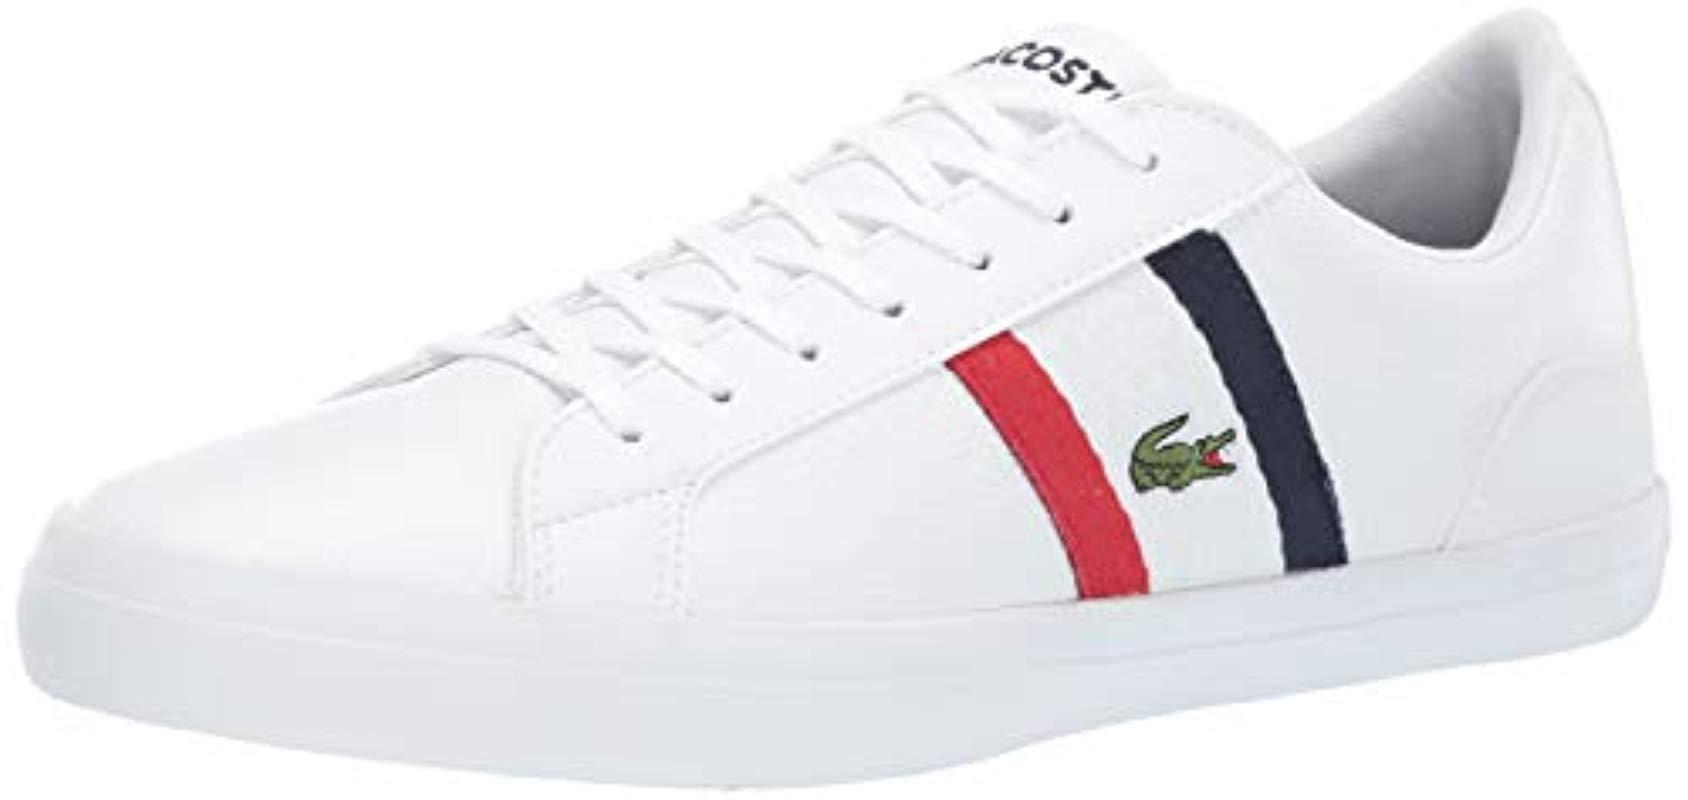 Lacoste S Lerond Sneaker in White/Red 